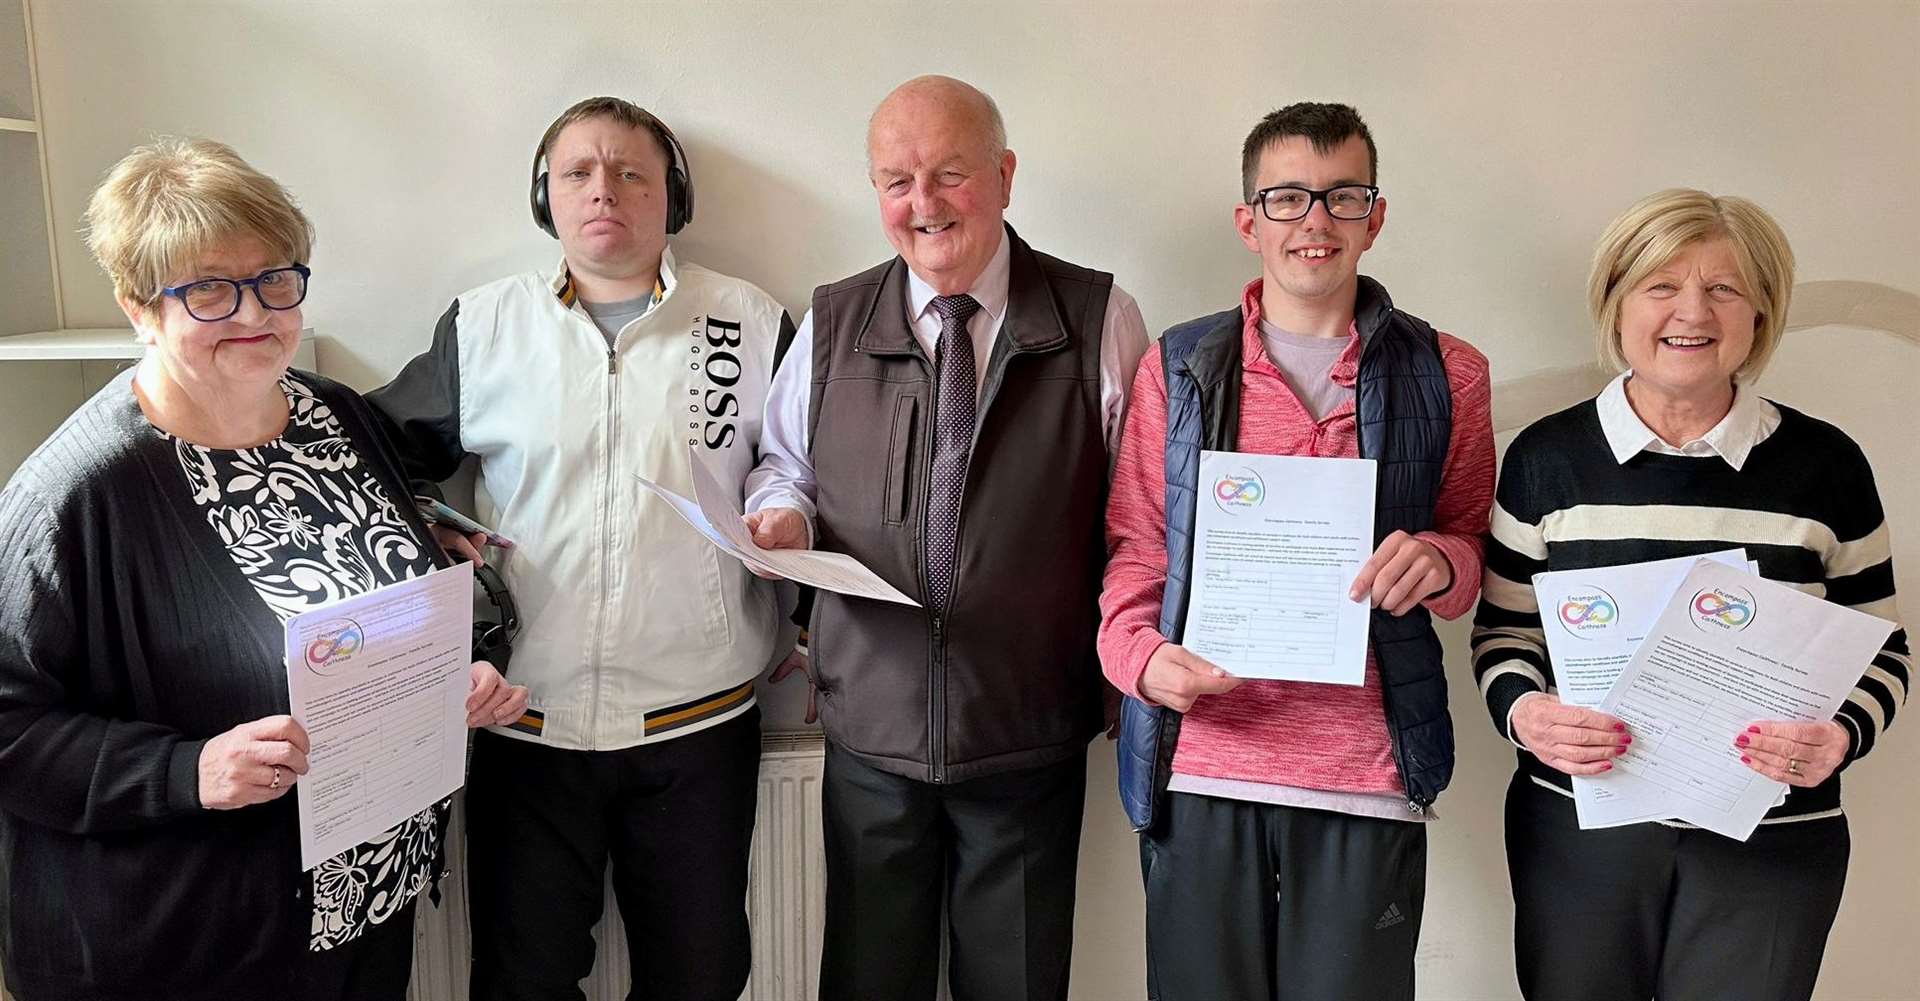 From left: Julie Mackinnon (Wick Youth Club), Tyler Mackay (Encompass Caithness), Councillor Willie Mackay, Conor Buchan (Encompass Caithness) and Councillor Mackay's wife Glynis (also Encompass Caithness) holding copies of the survey.